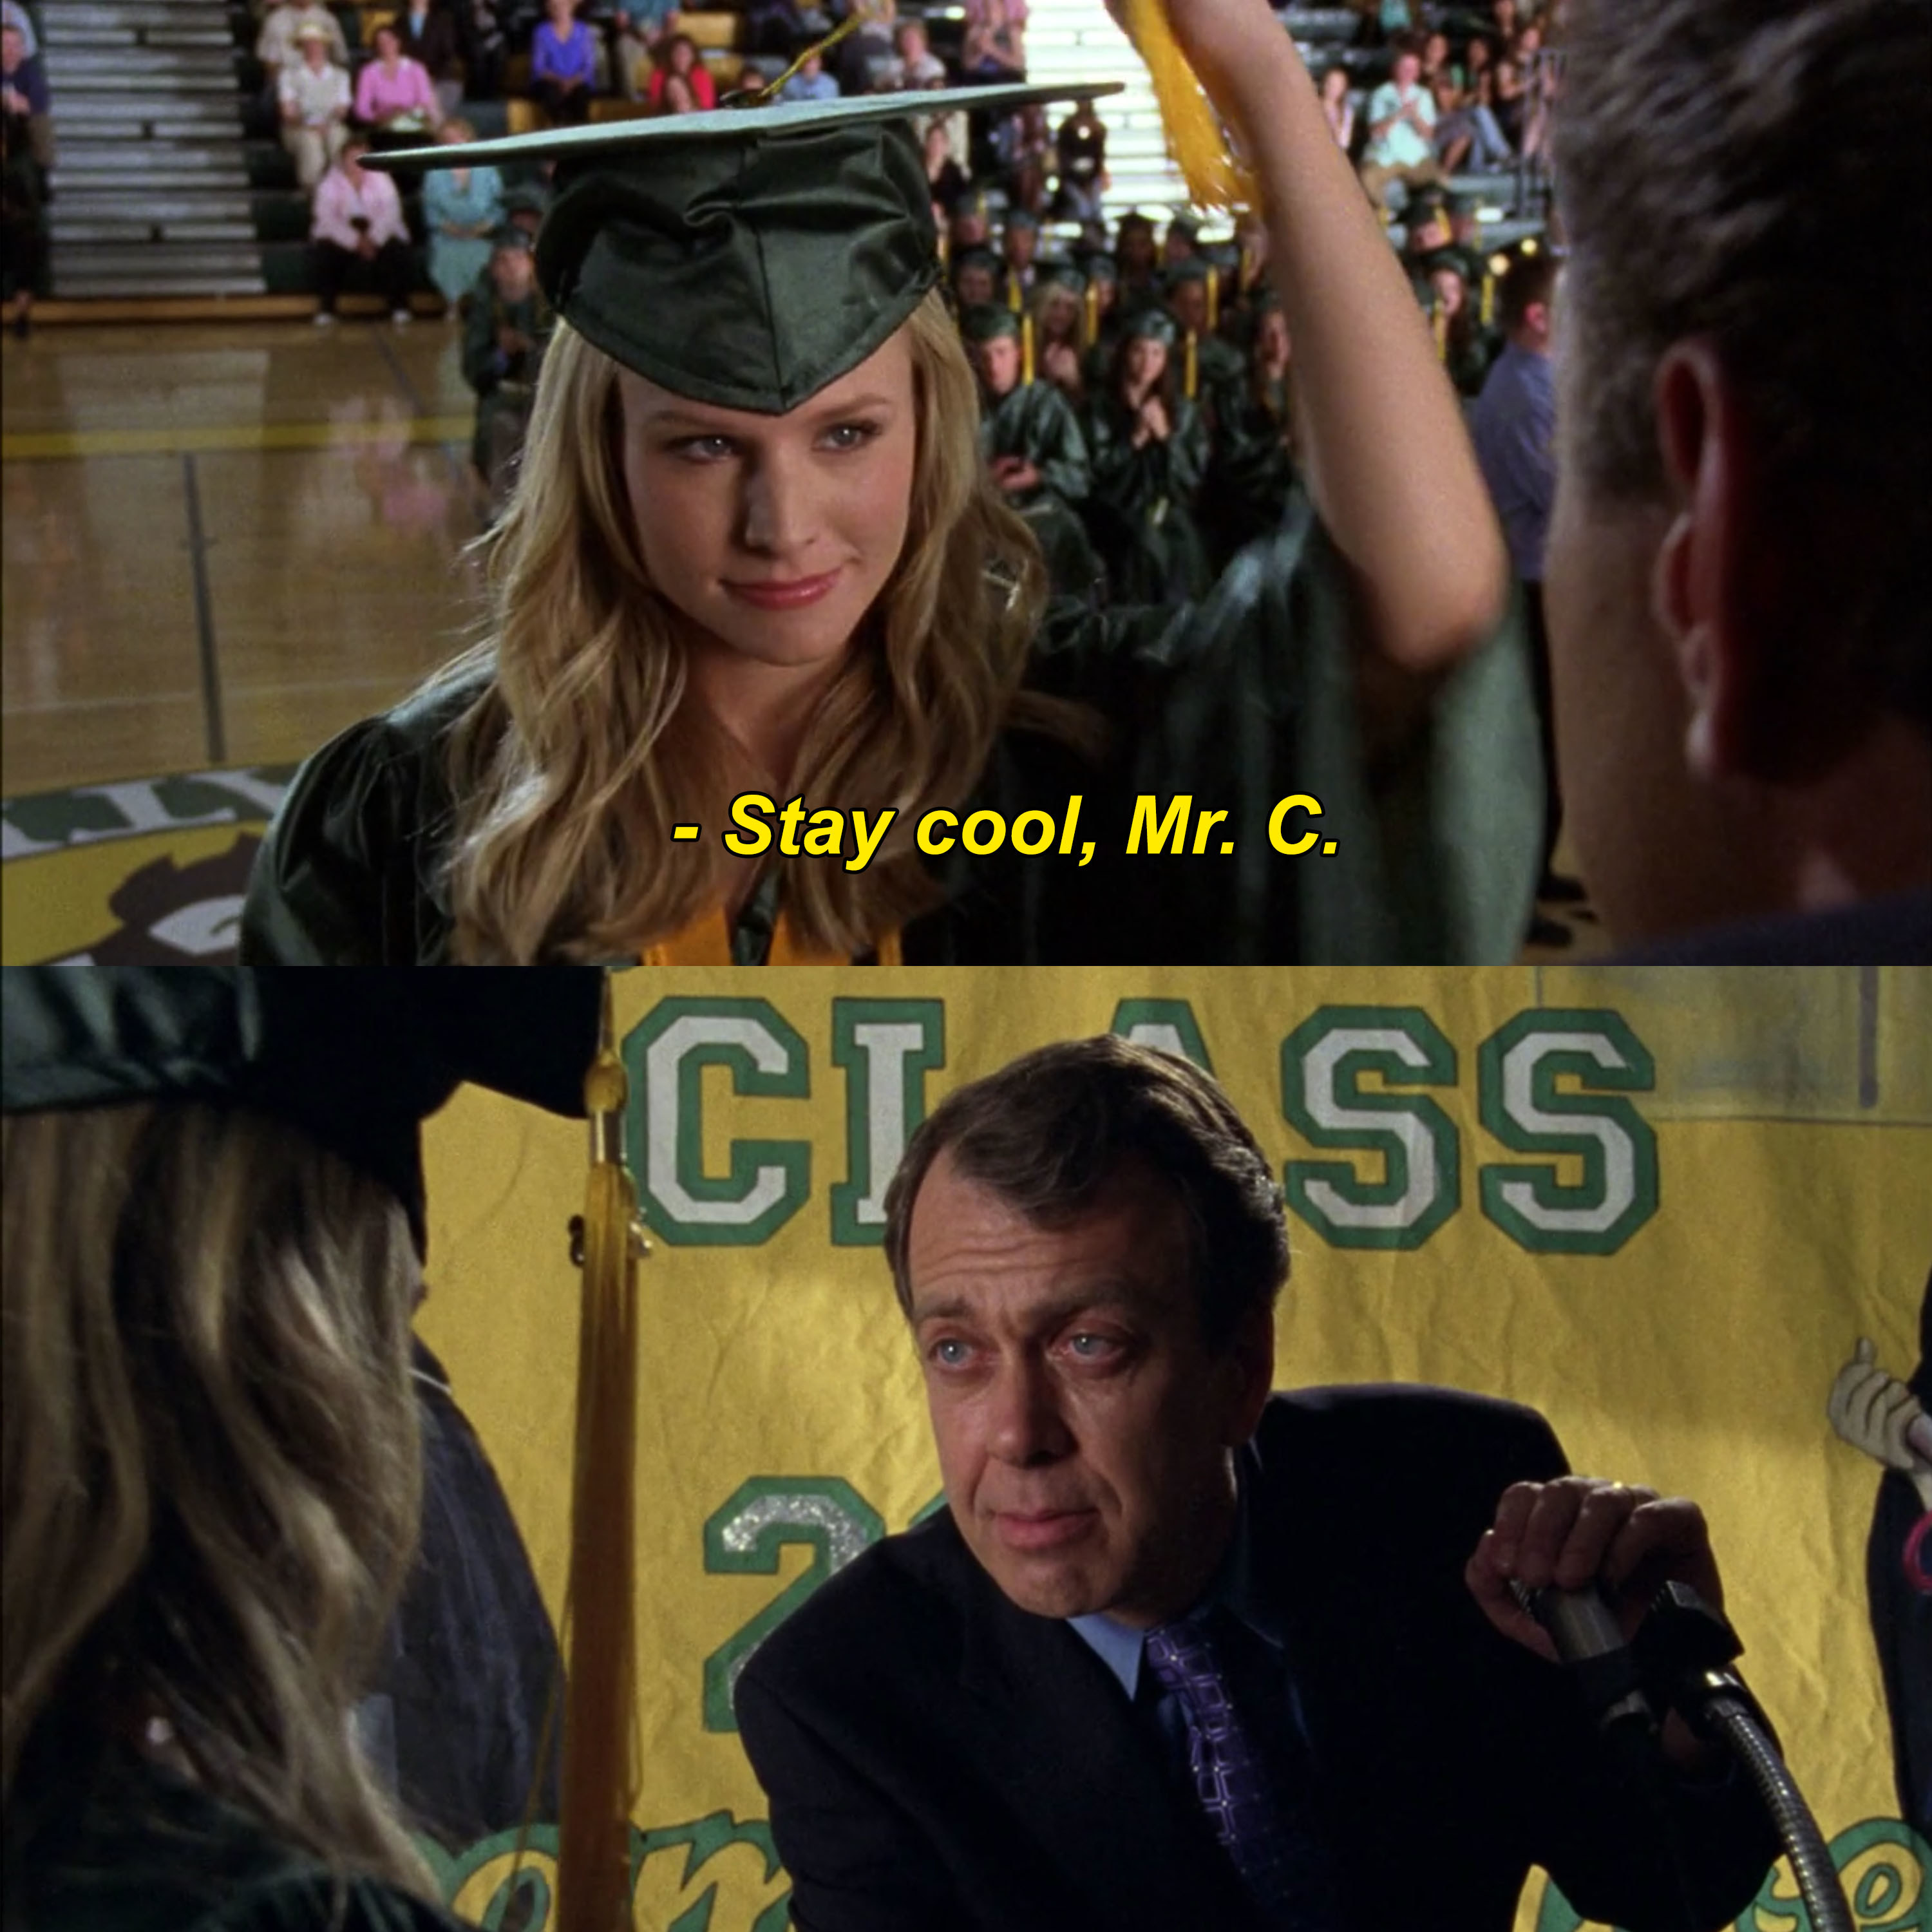 Kristen Bell as Veronica says goodbye to Principal Clemmons during her high school graduation in &quot;Veronica Mars&quot;